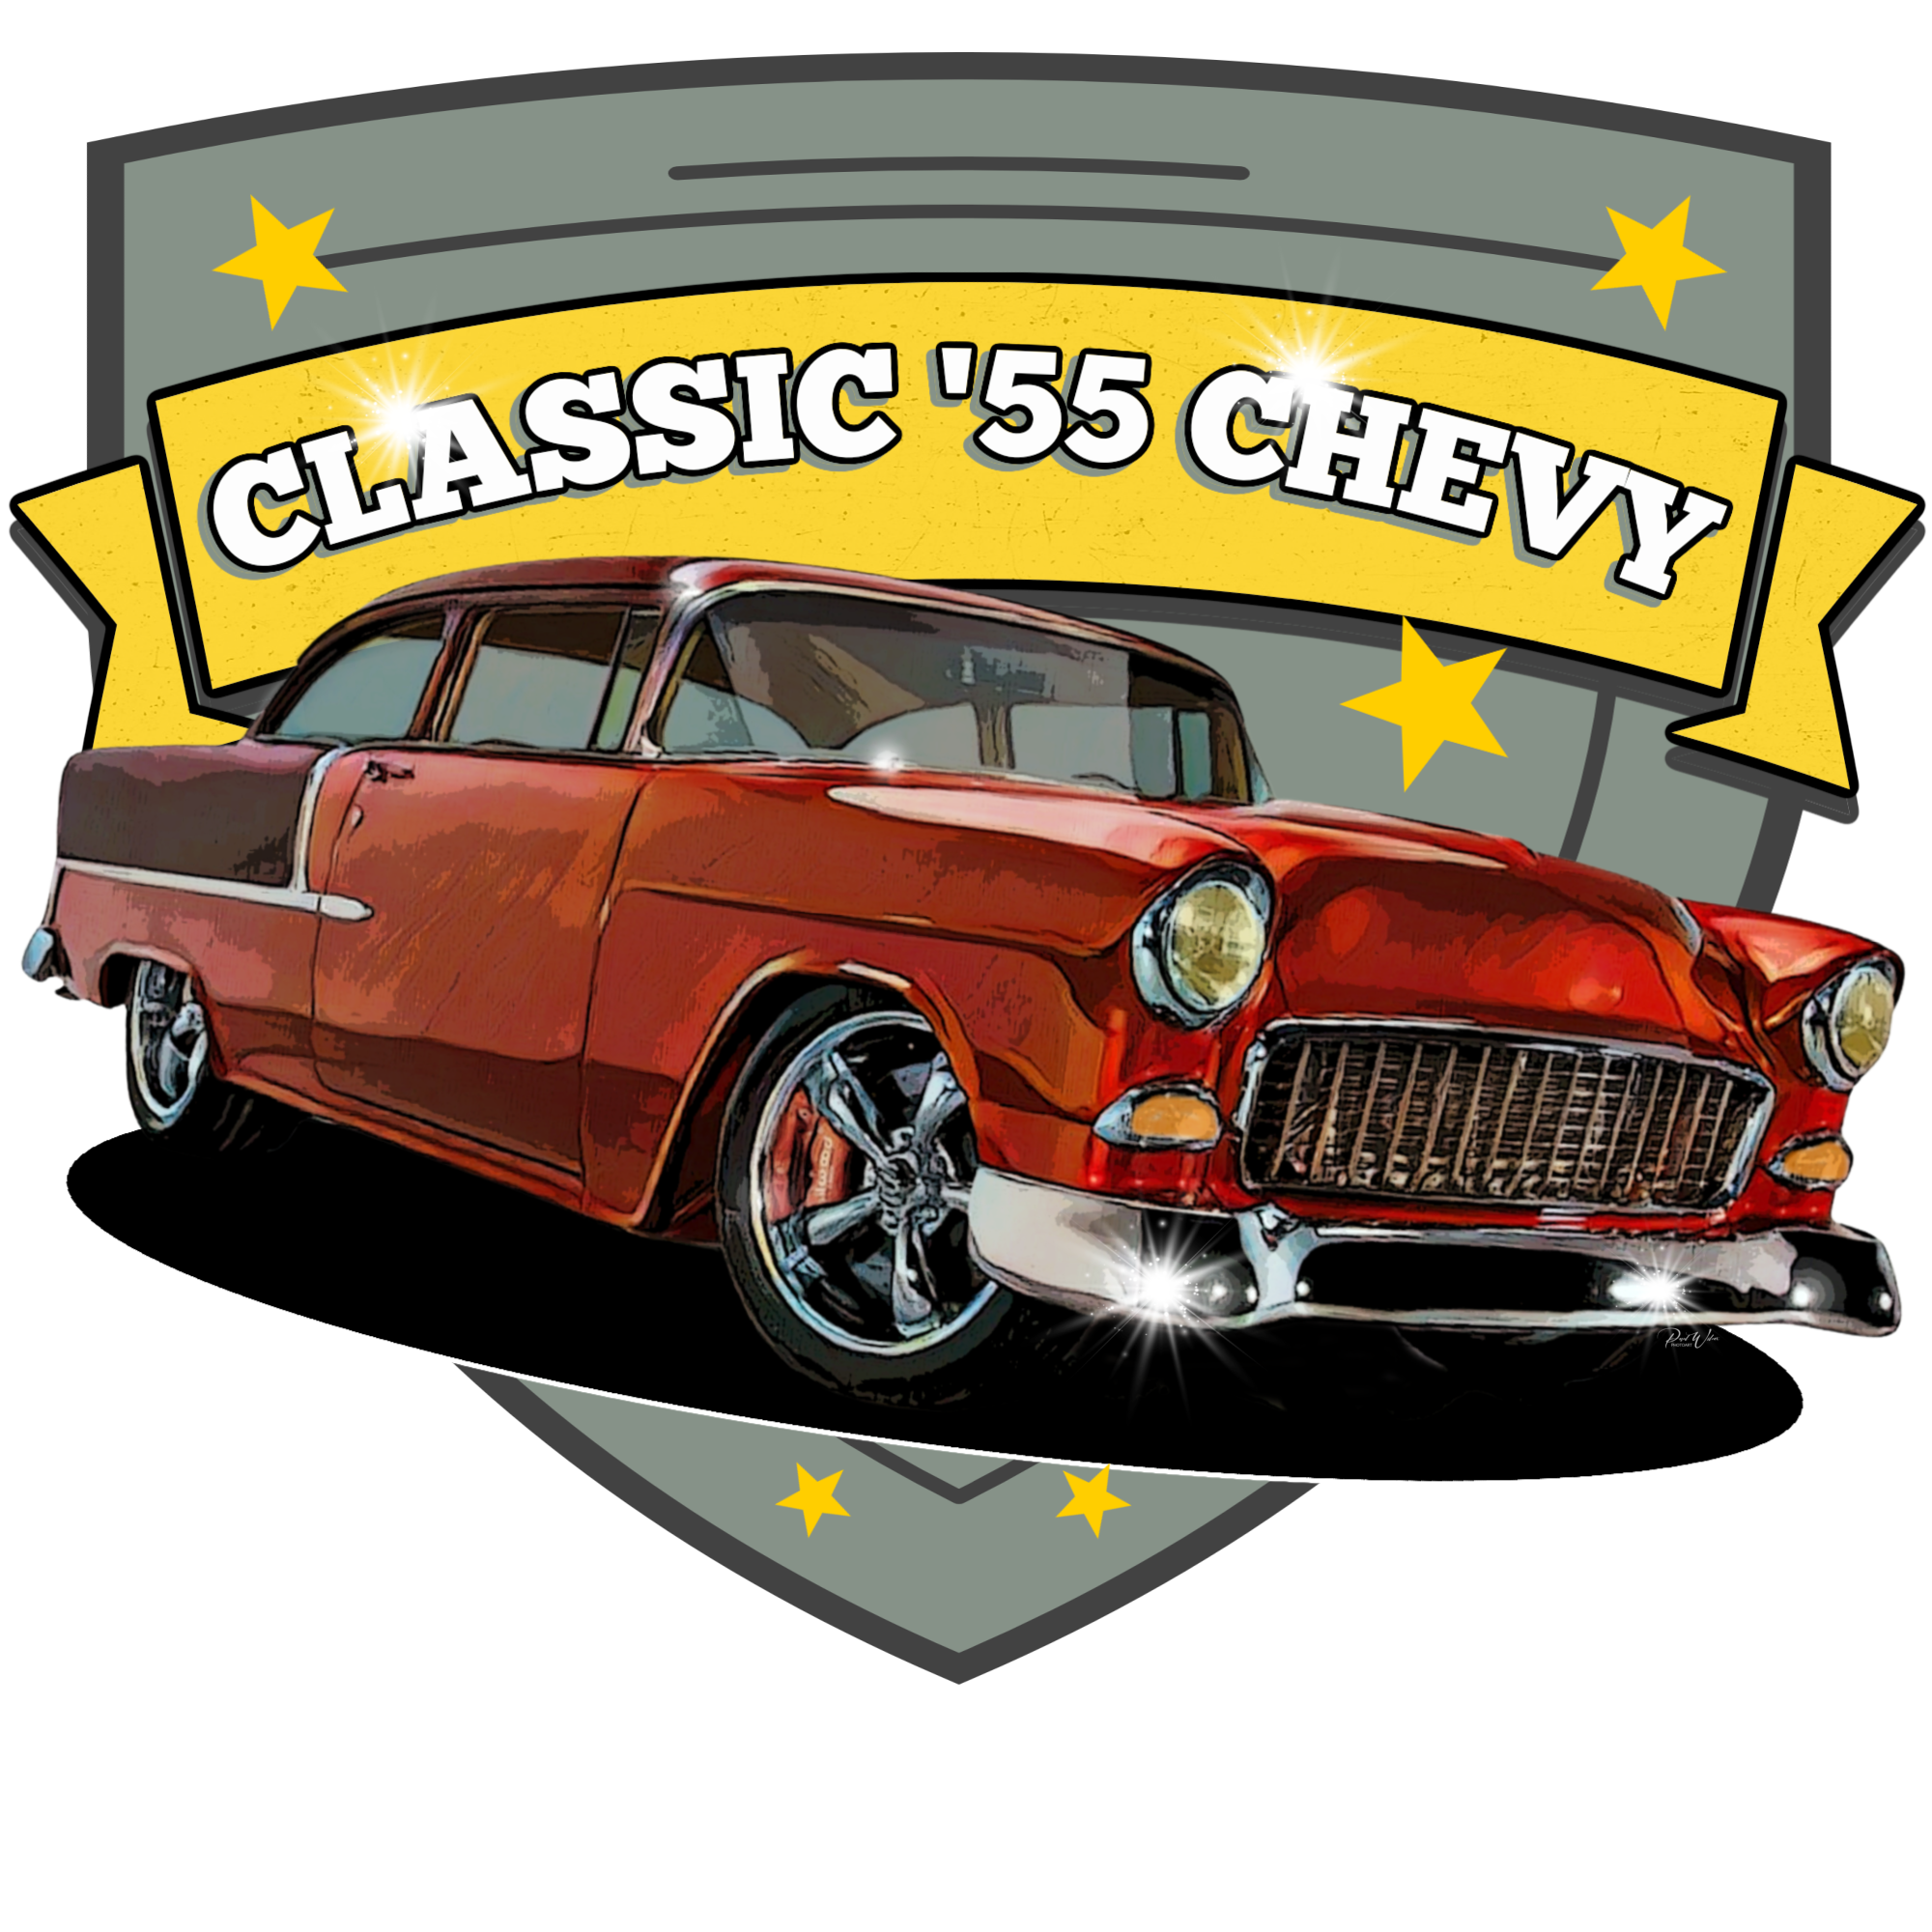 Classic 1955 Chevy - Image